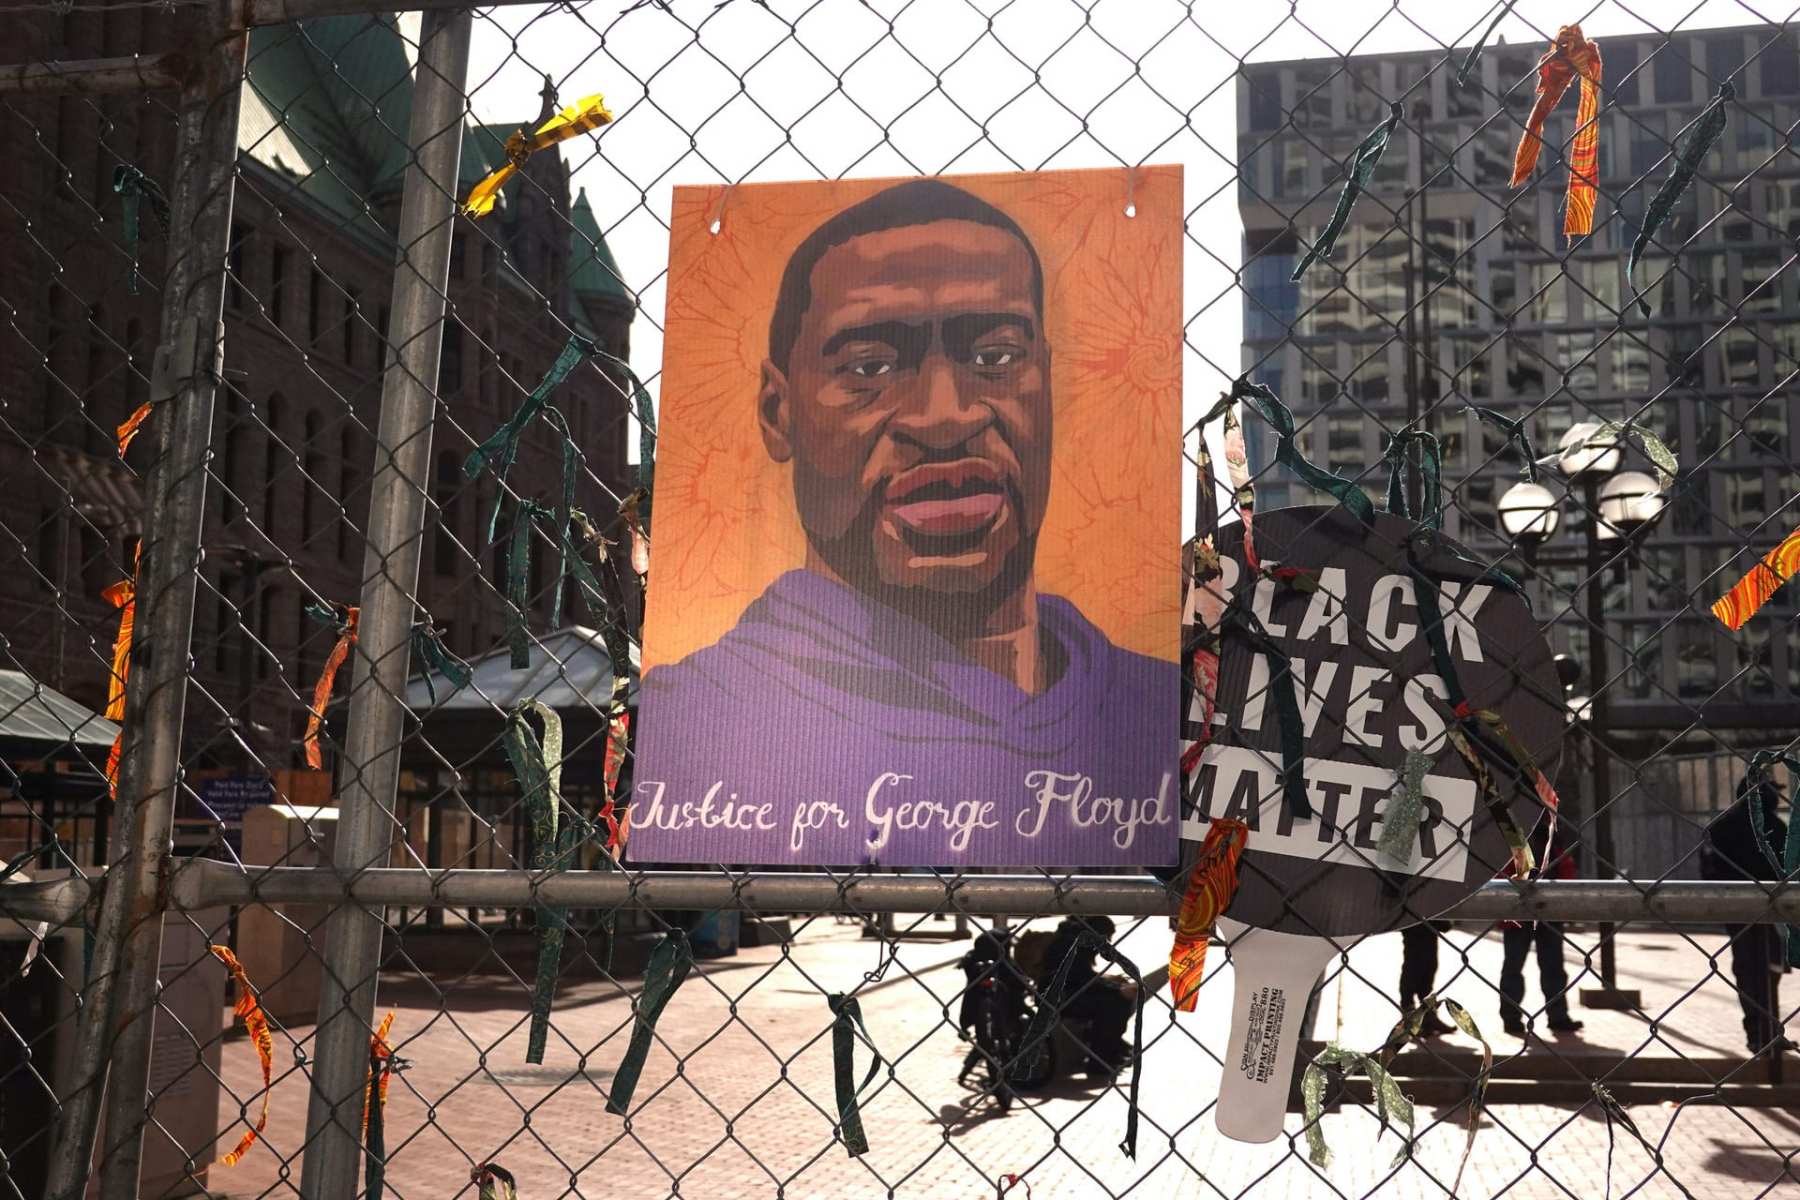 A illustration of George Floyd hangs on fencing next to a sign that reads 